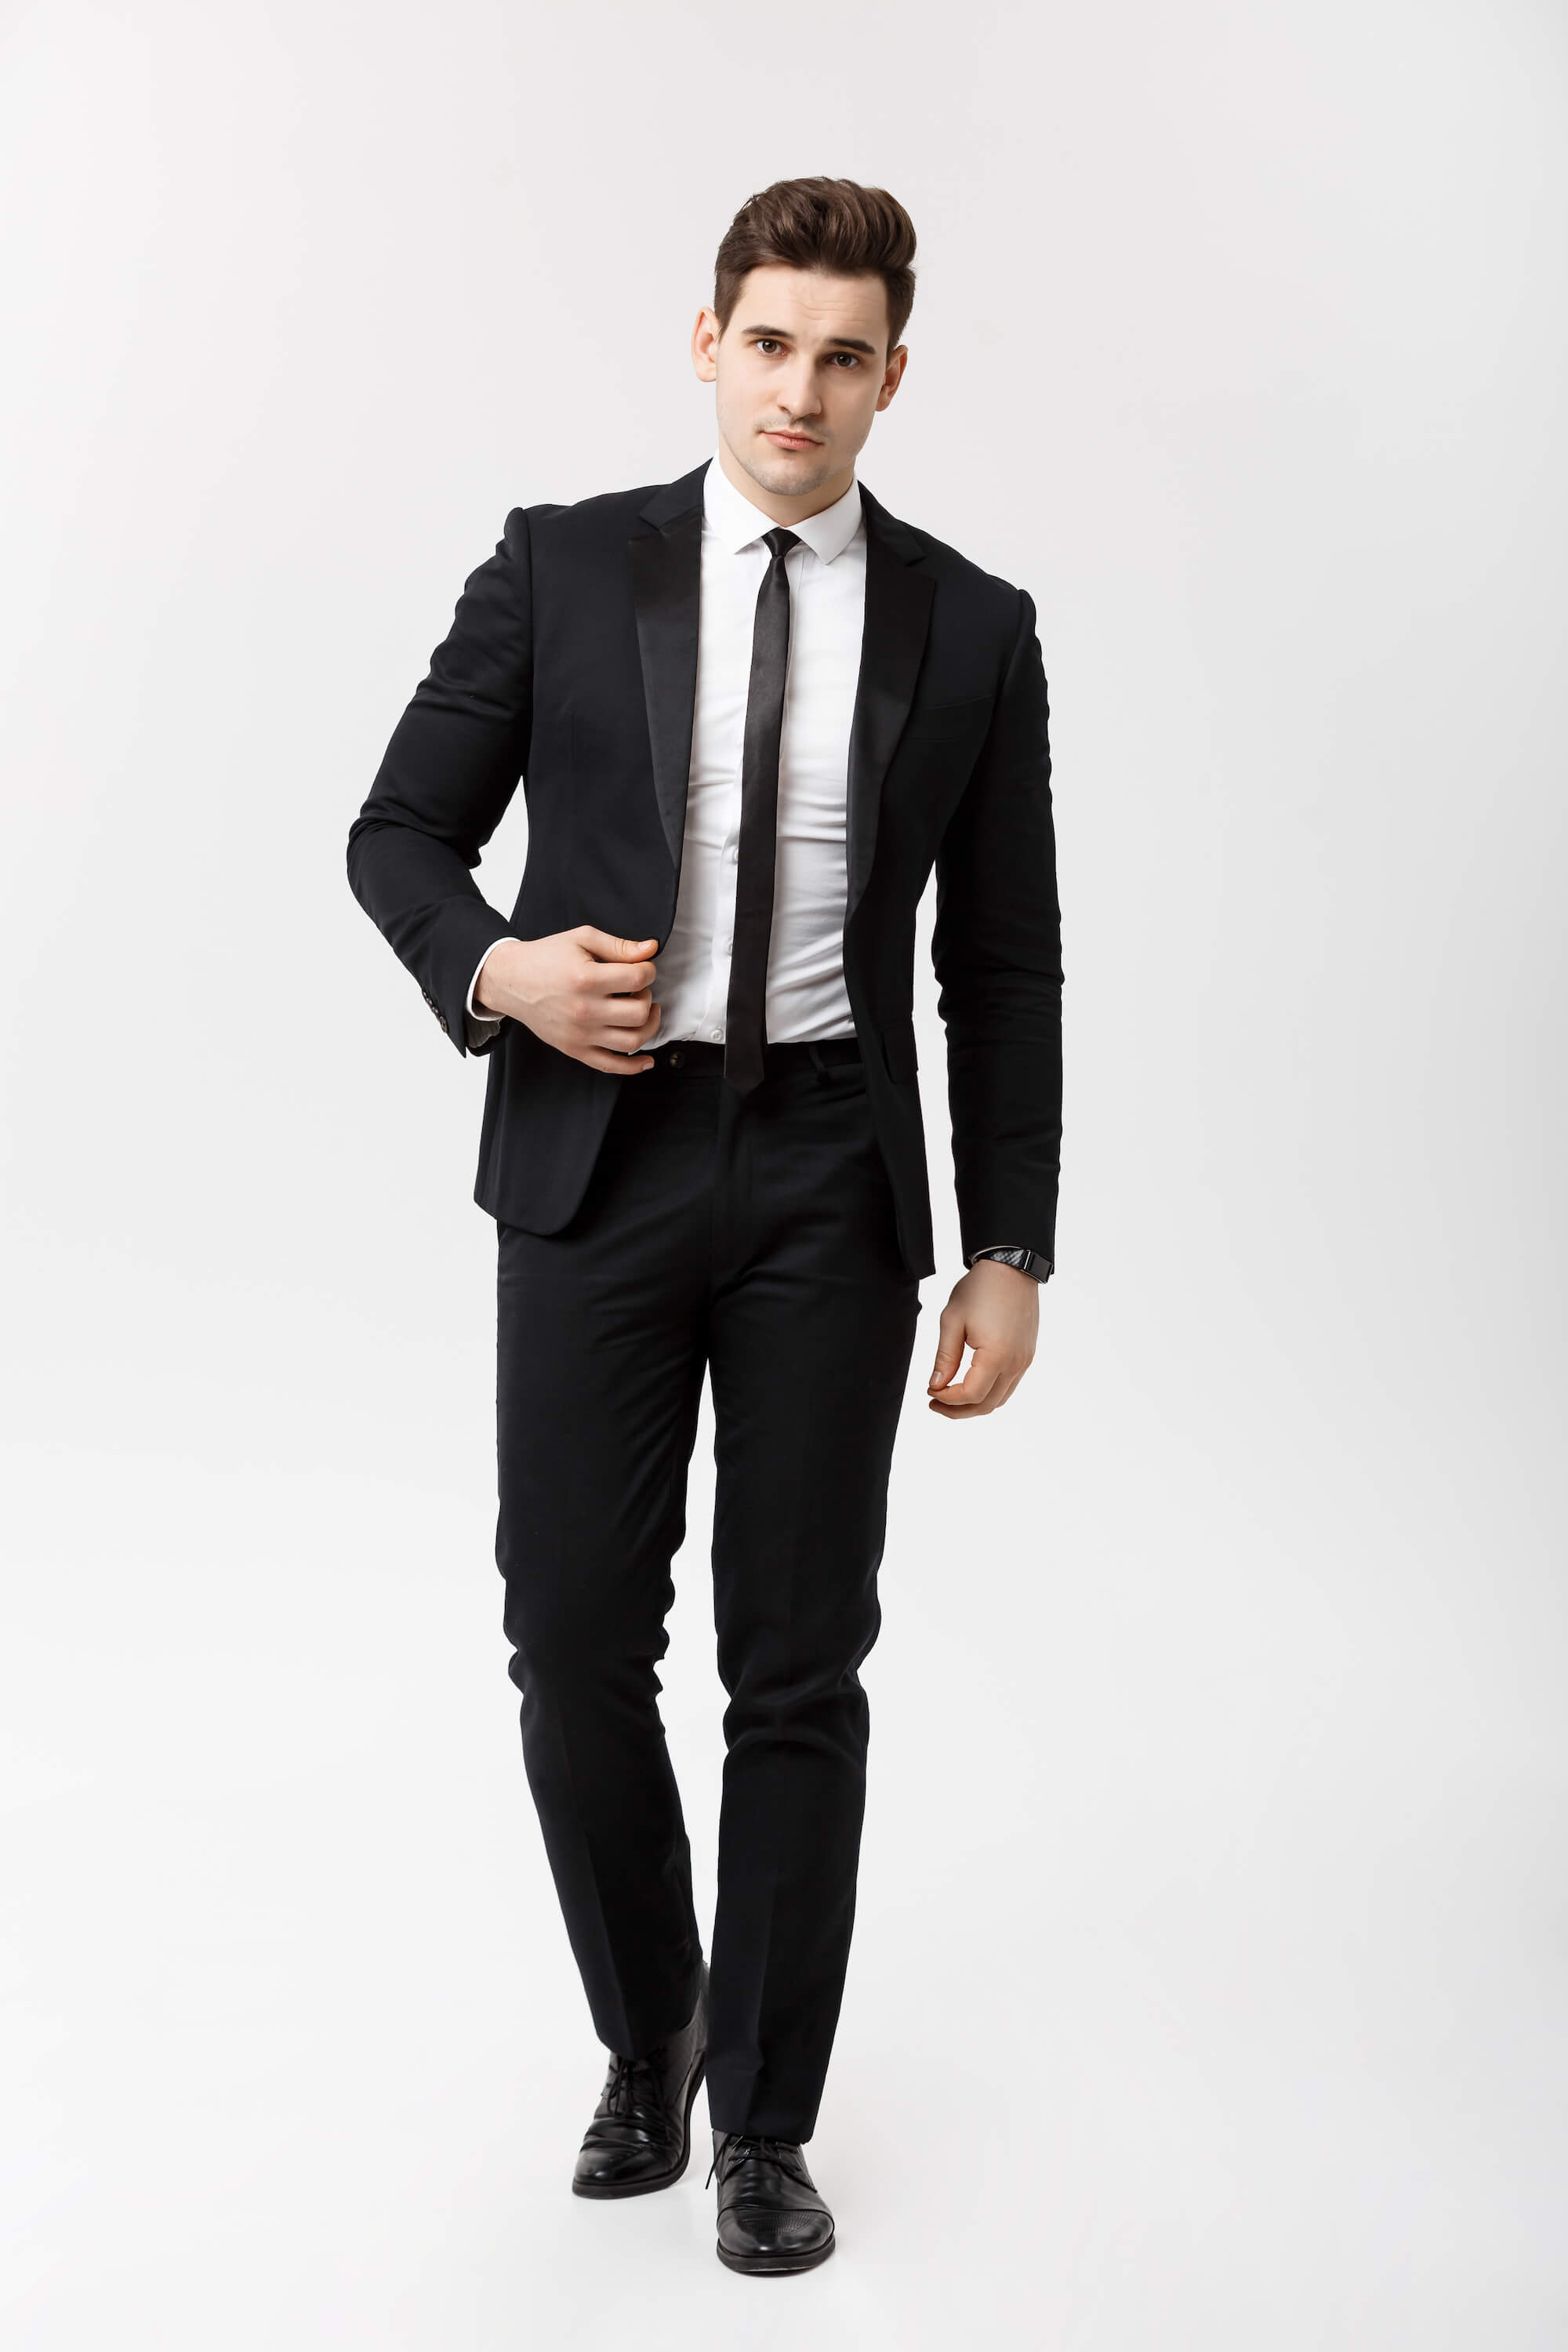 Young man in black suit